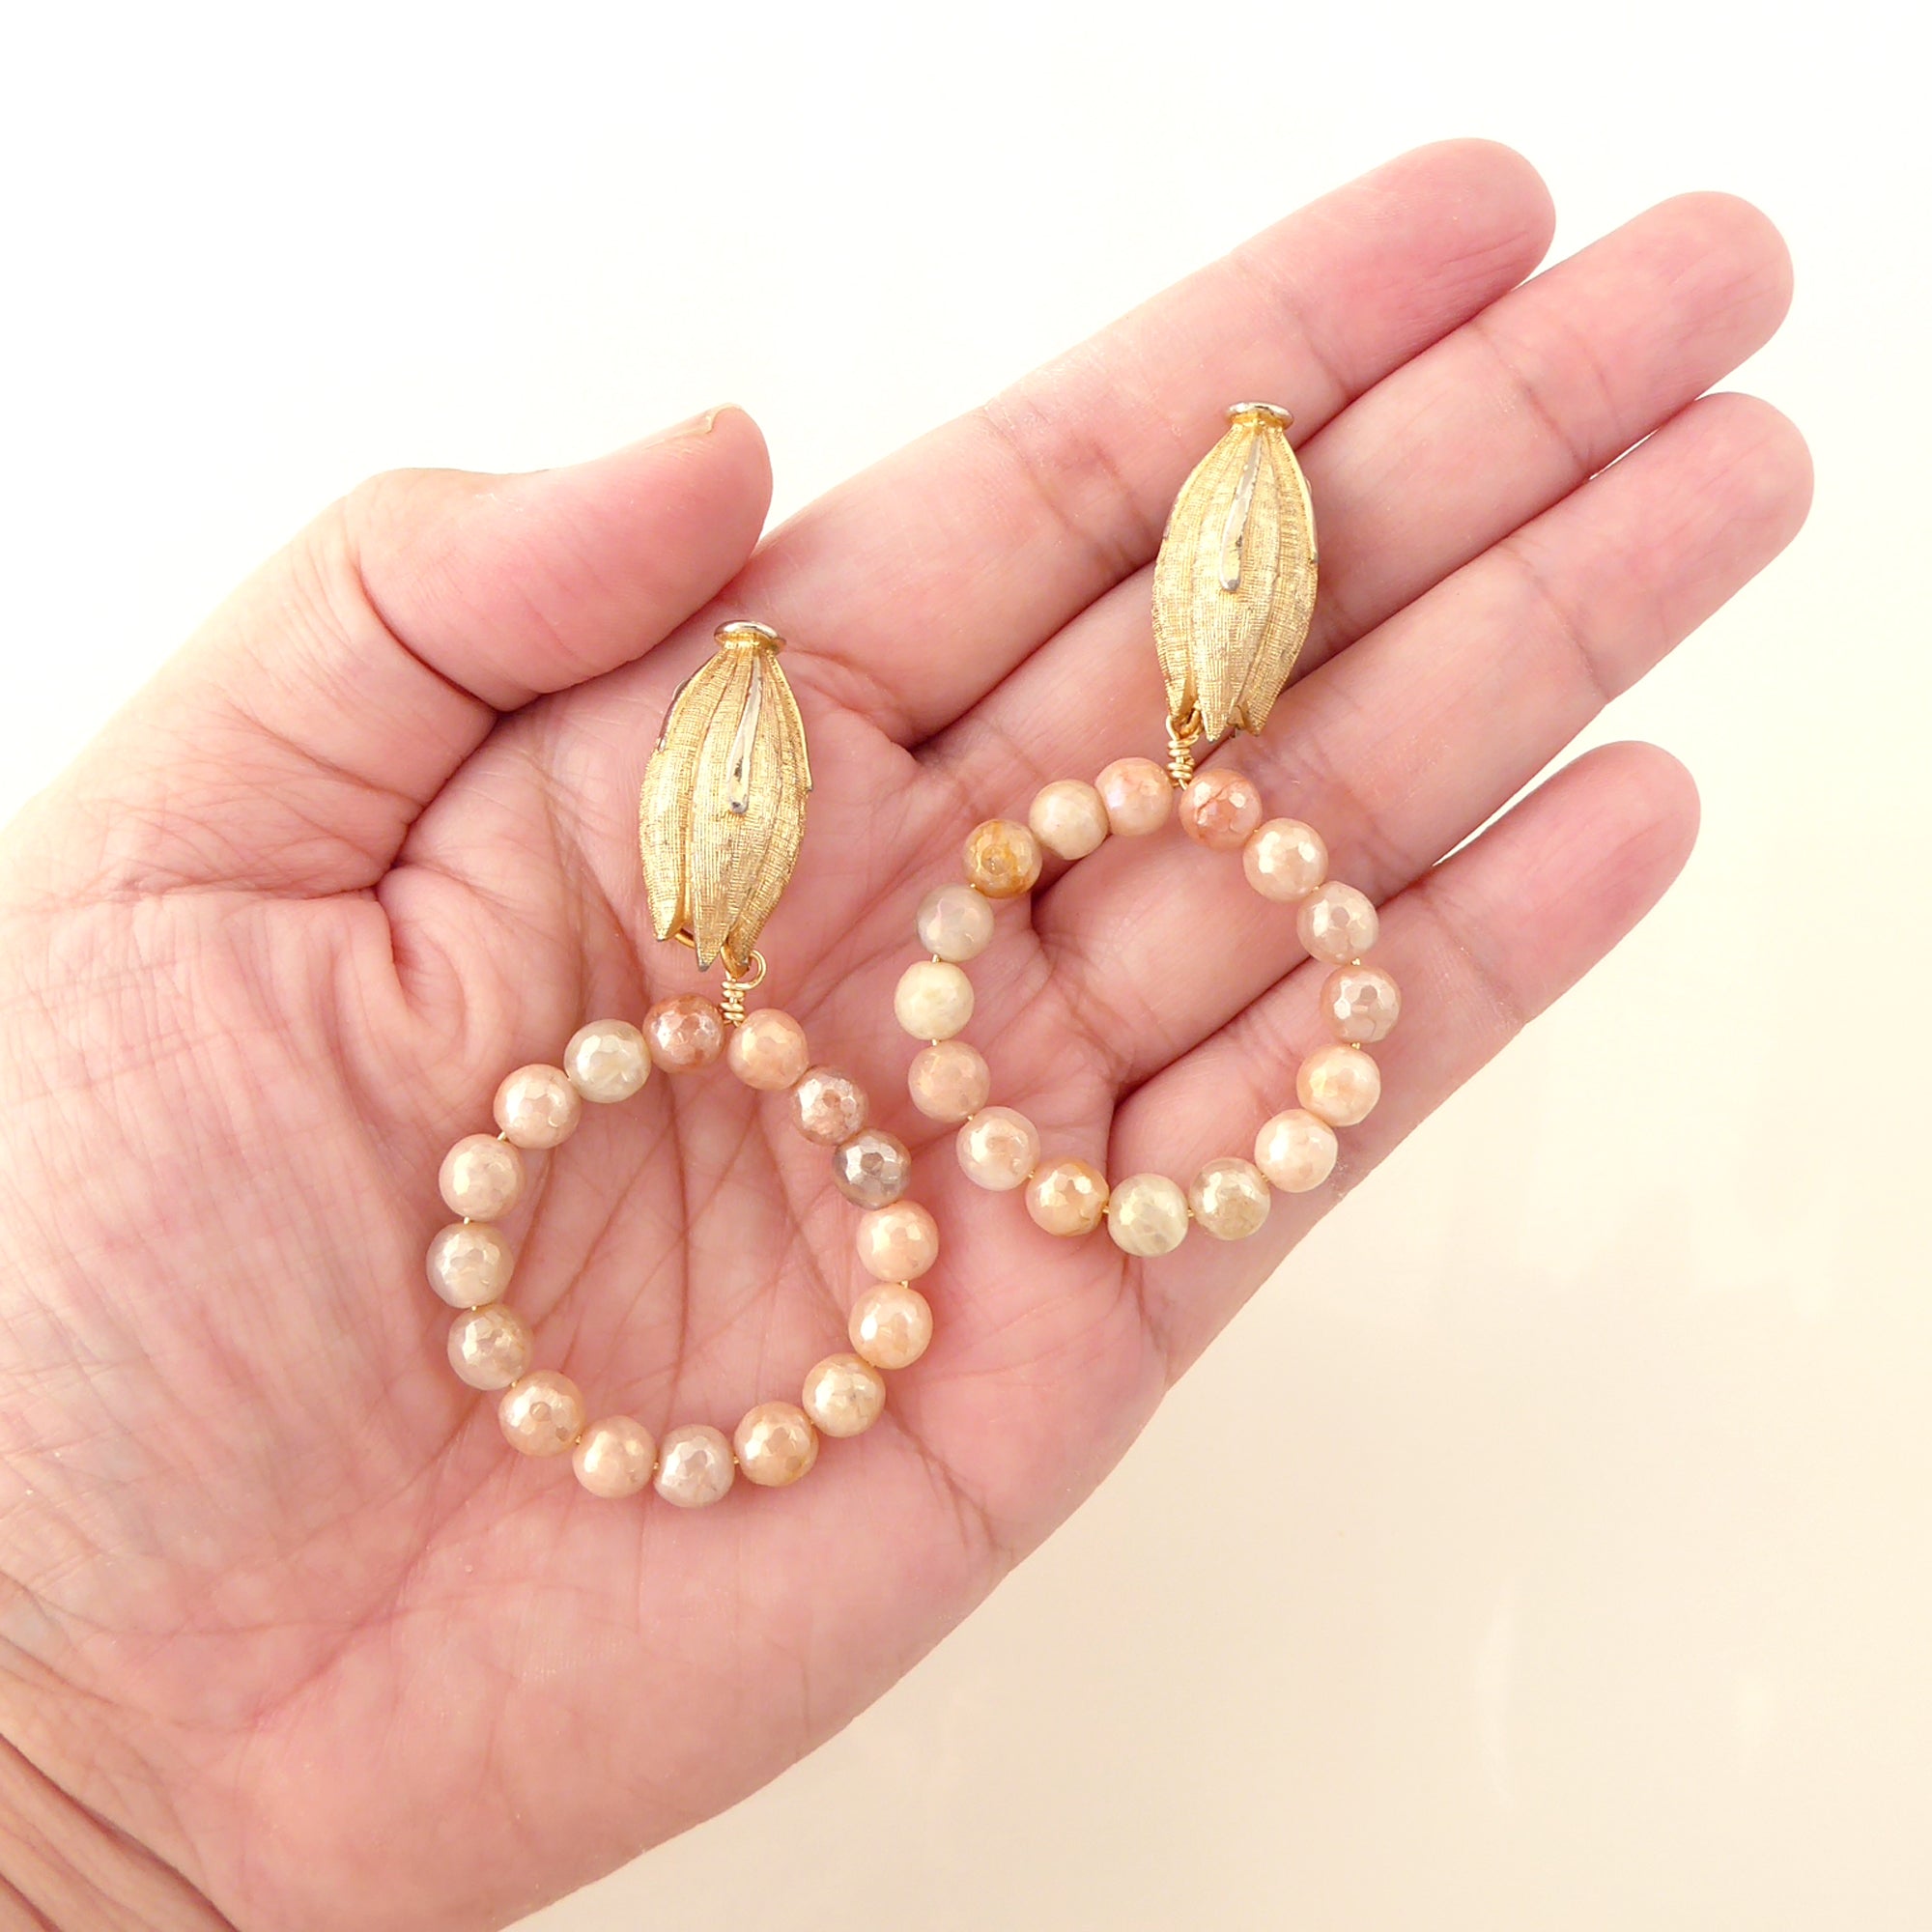 Iridescent peach moonstone earrings by Jenny Dayco 5